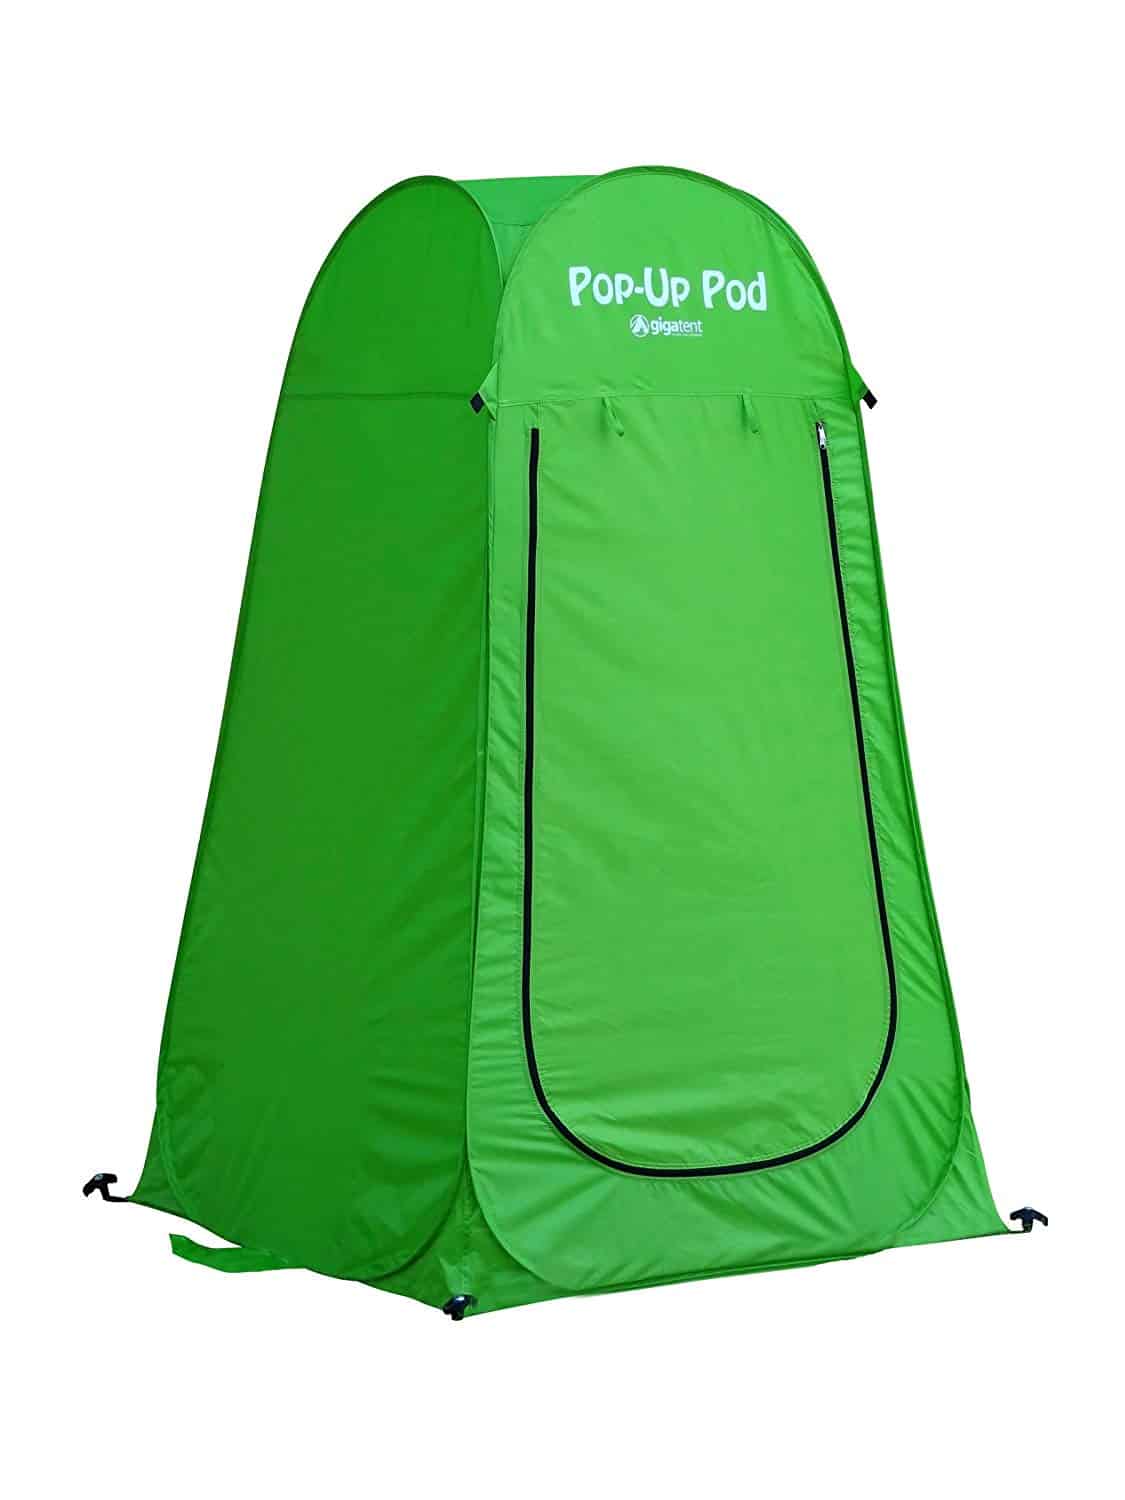 Gigatent pop up pod changing room privacy tent